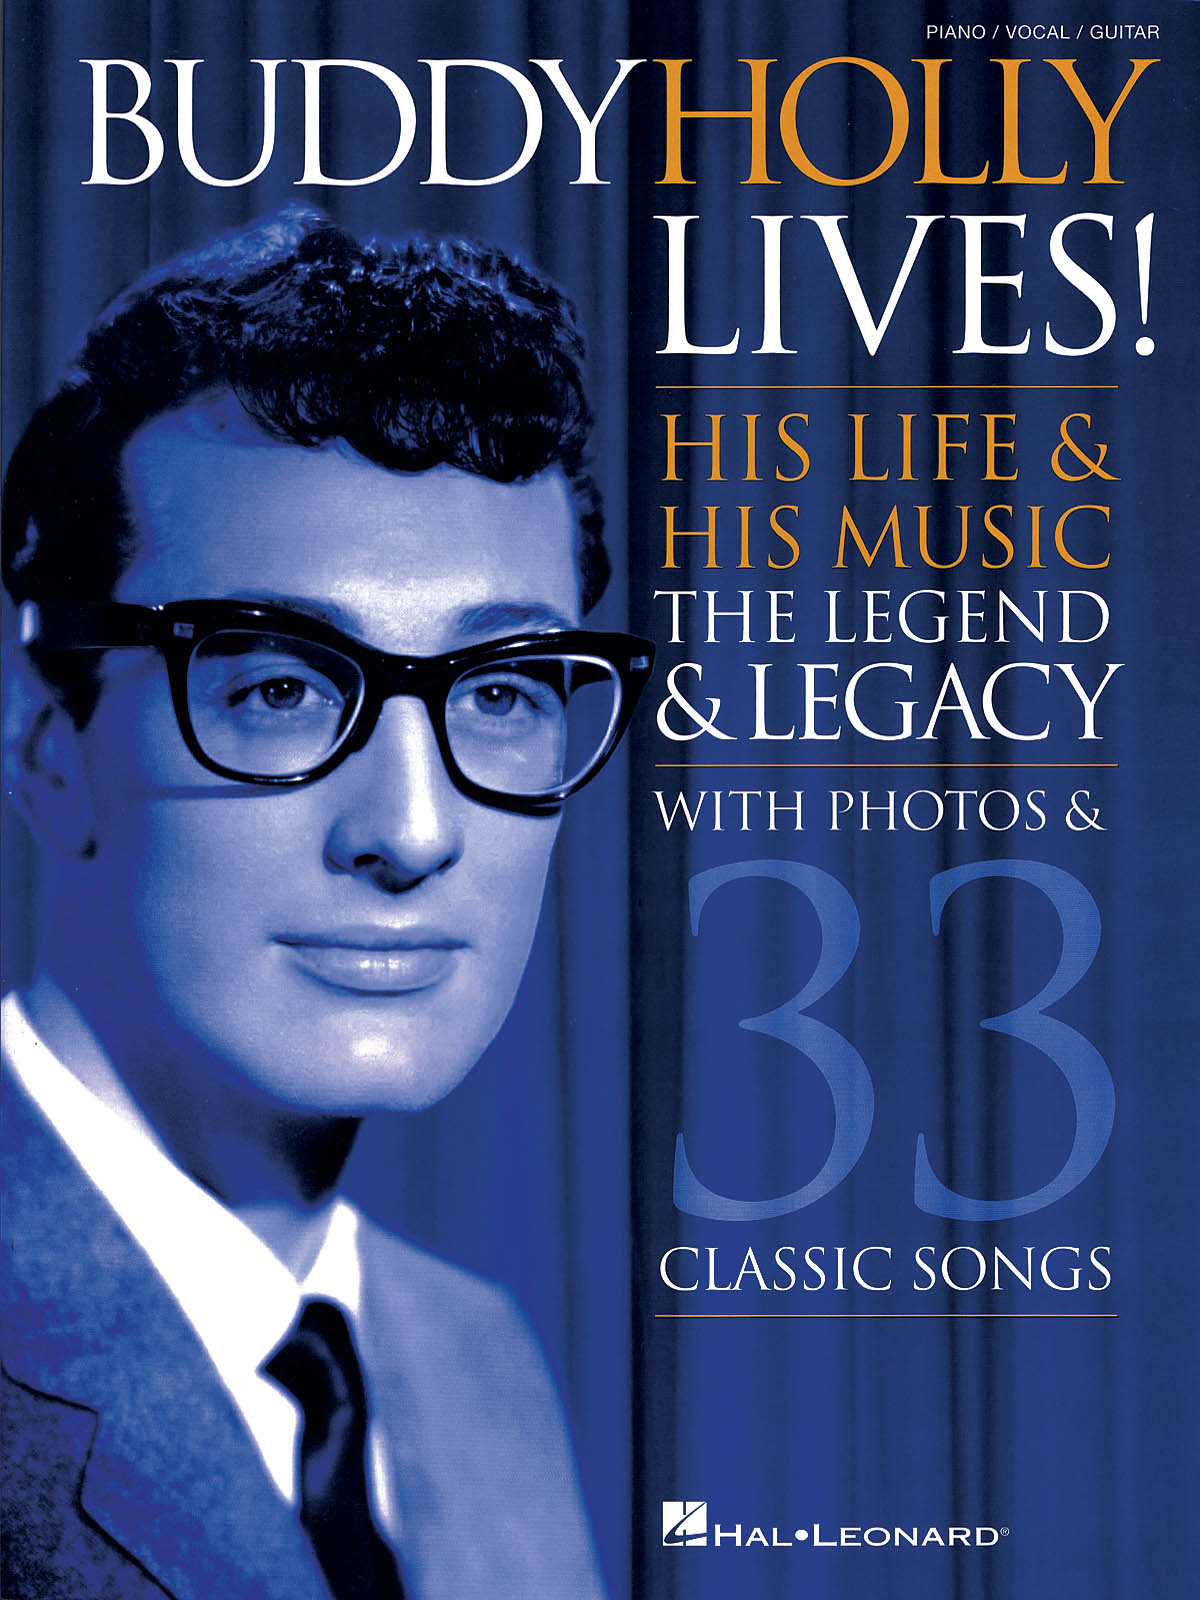 Buddy Holly Lives!(His Life & His Music - With Photos & 33 Classic Songs)